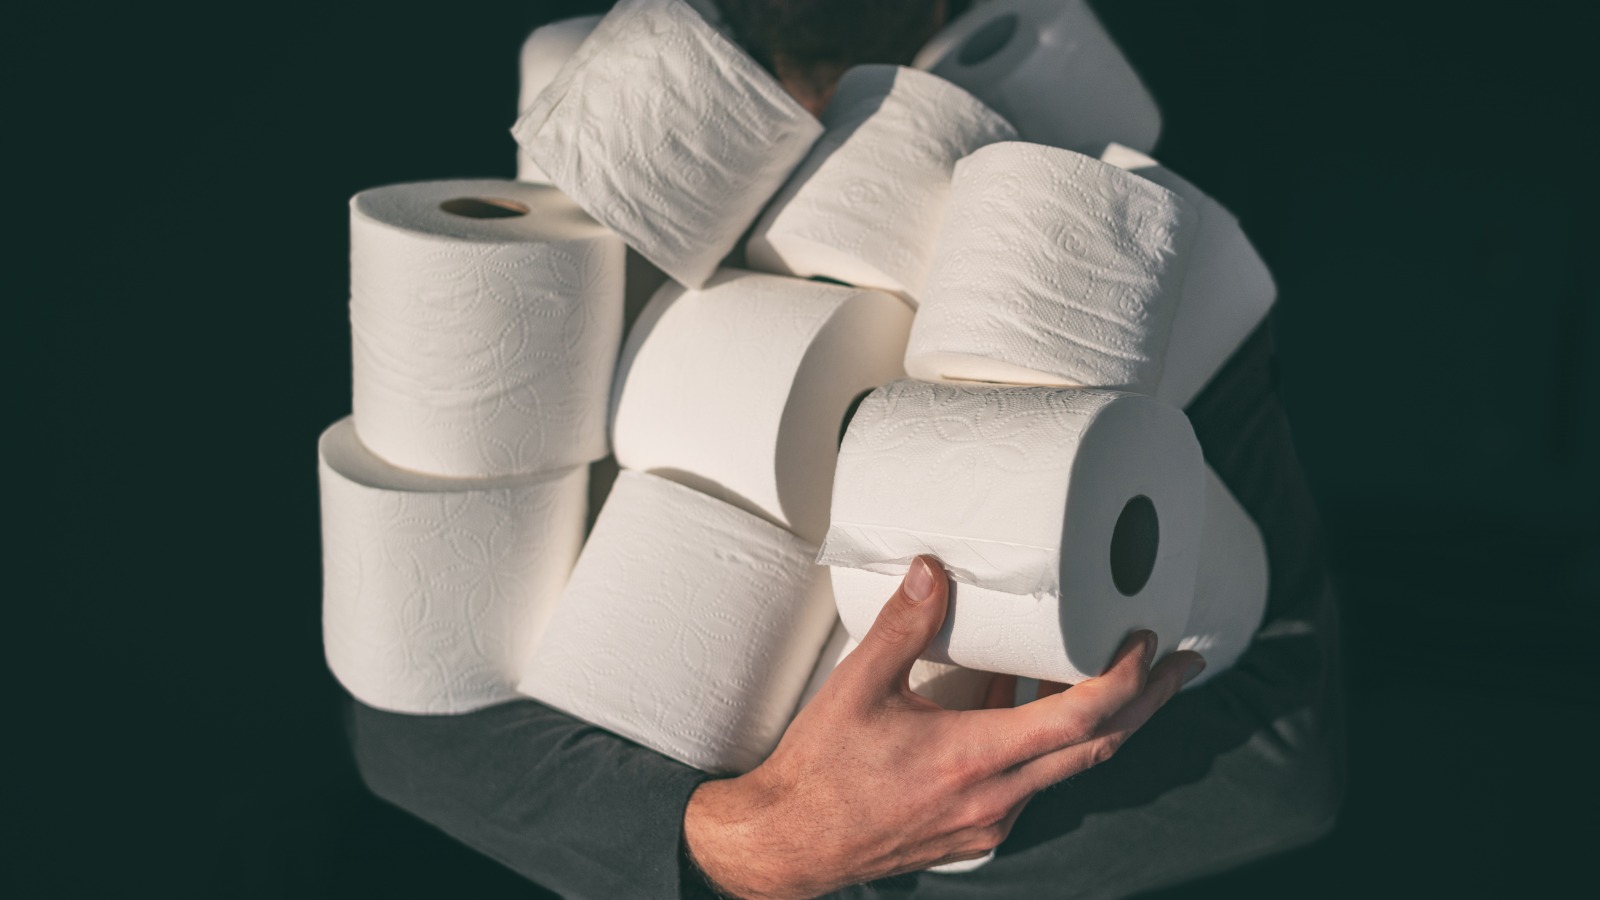 The Real Reason Stores Are Putting Limits On Toilet Paper Again